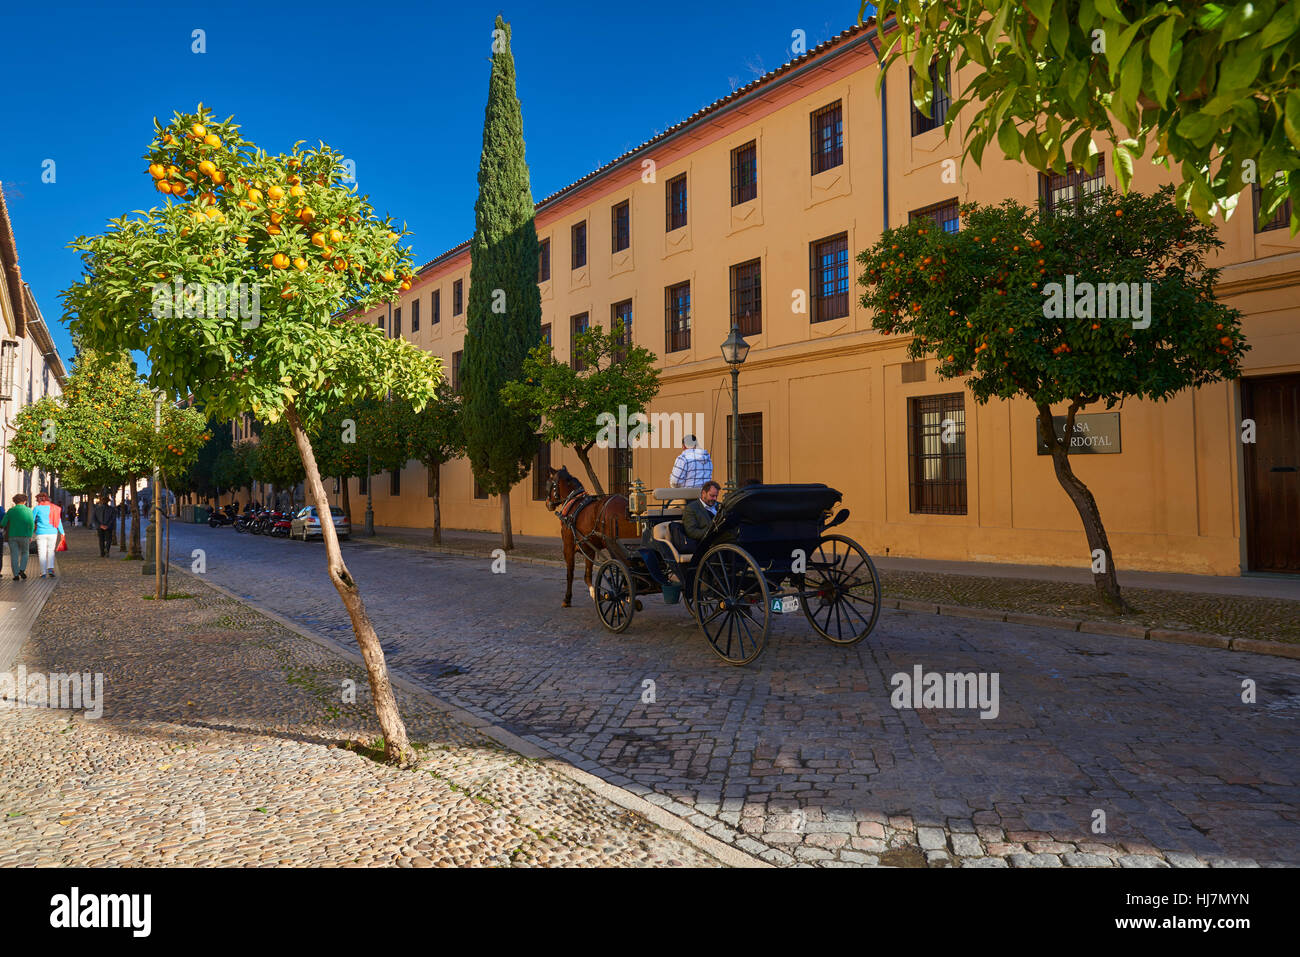 A traditional horse and carriage, Cordoba, Andalusia, Spain, Europe Stock Photo